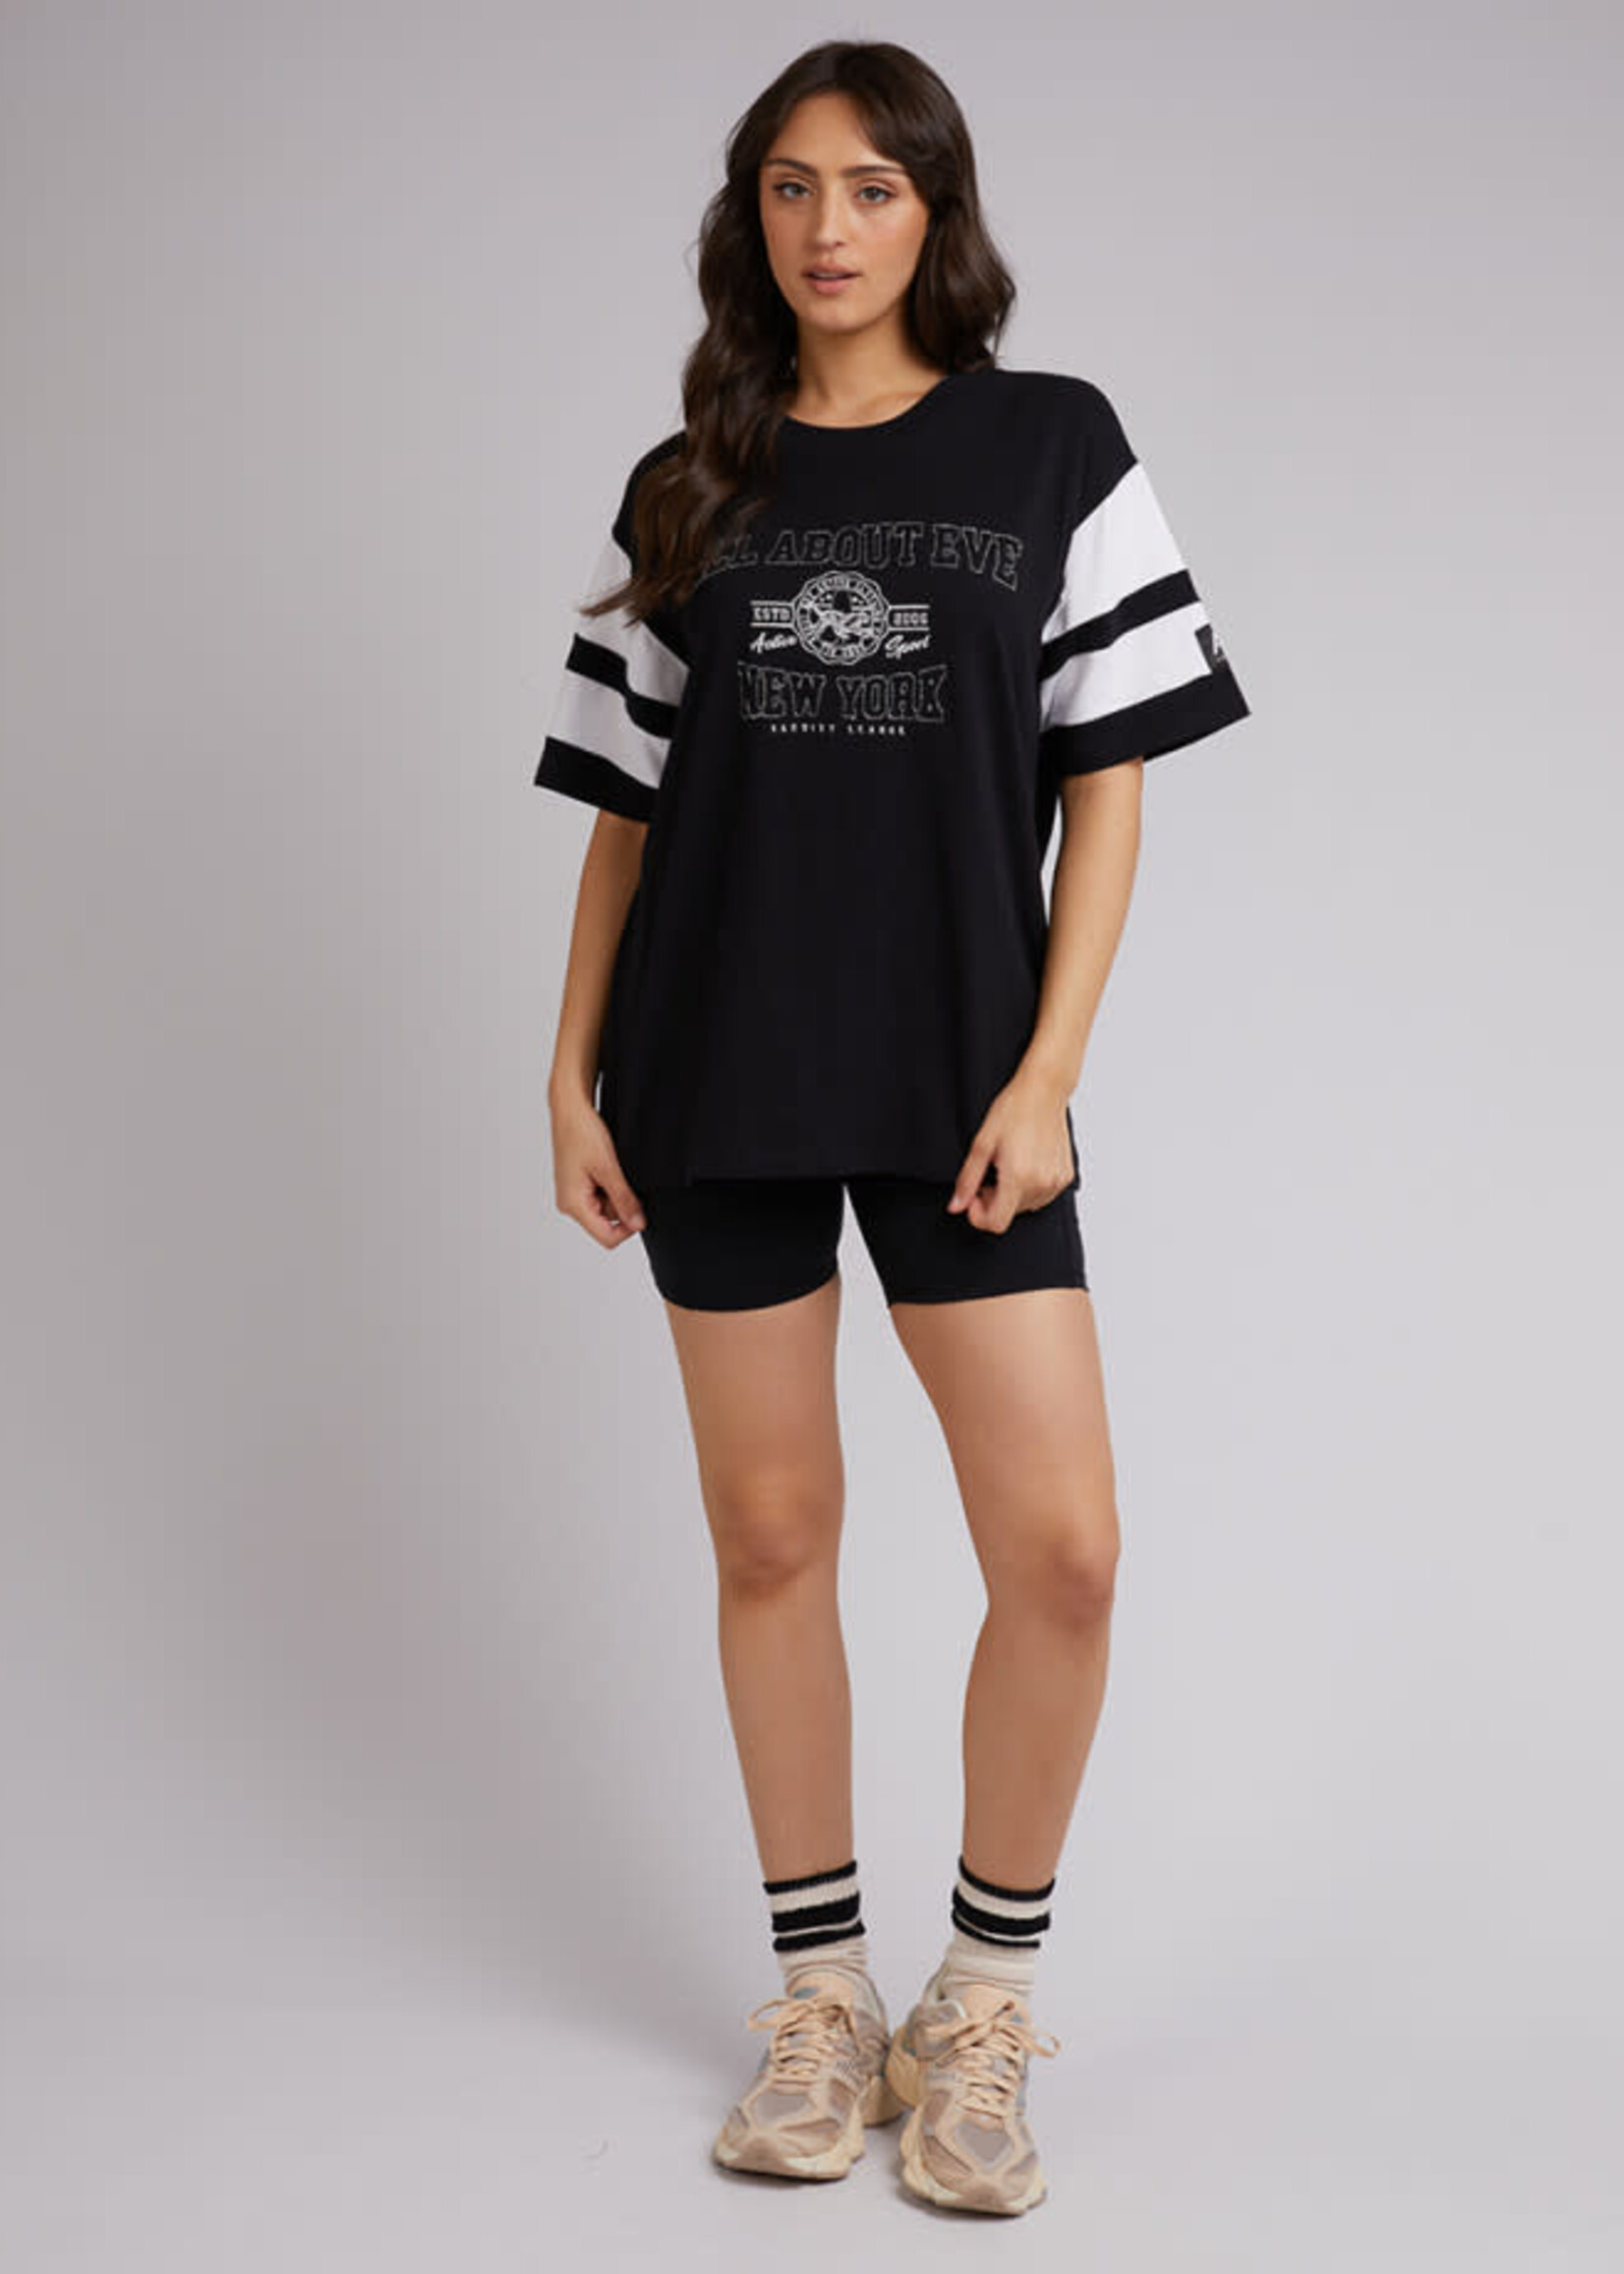 All About Eve Game Tee